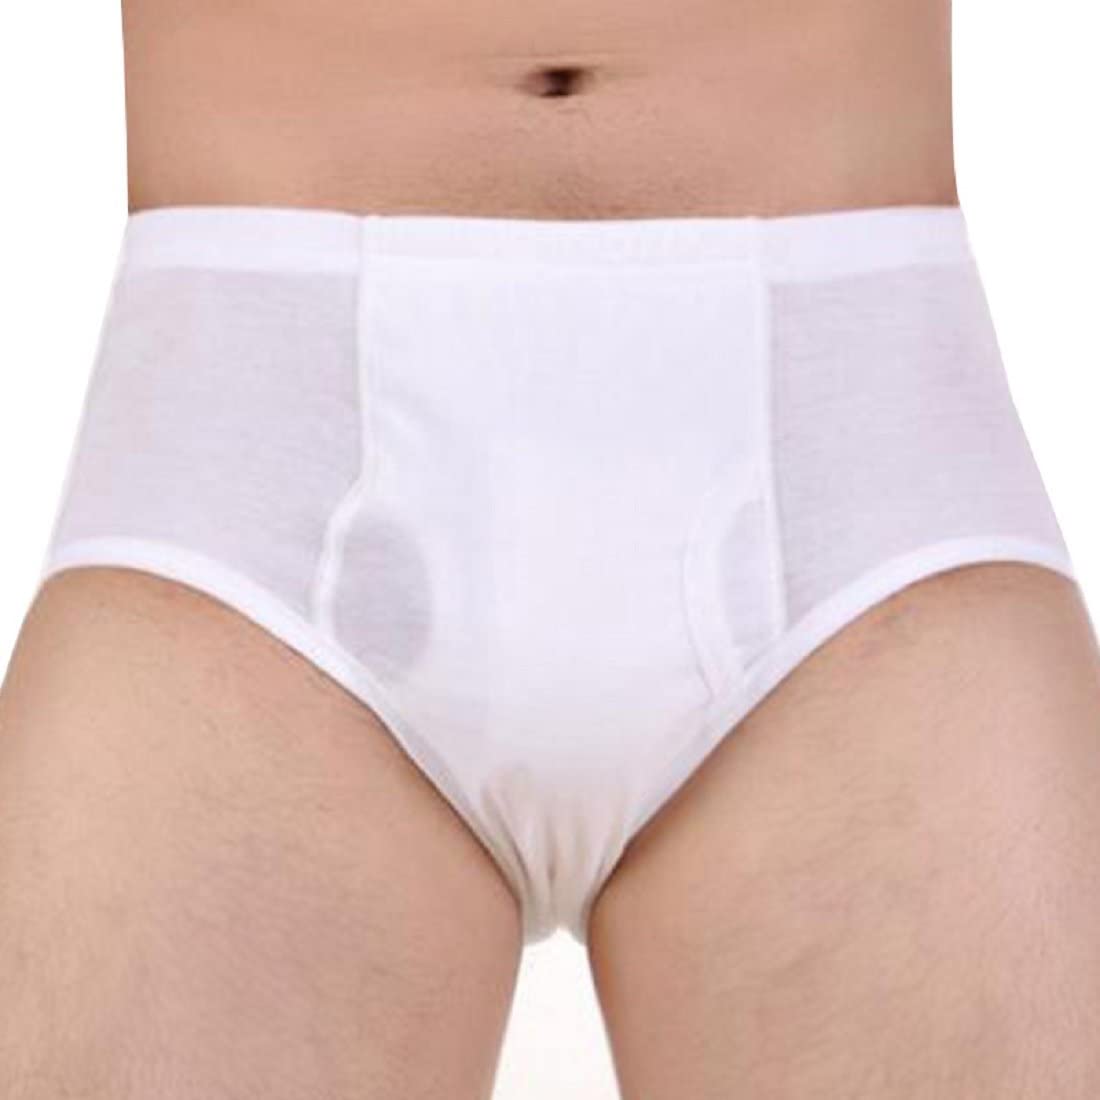  Washable Mens Incontinence Briefs, 2 Packs Incontinence Underwear  Reusable Incontinence Overnight Underwear for Men, Built in Cotton Pad  (White, M) : Health & Household